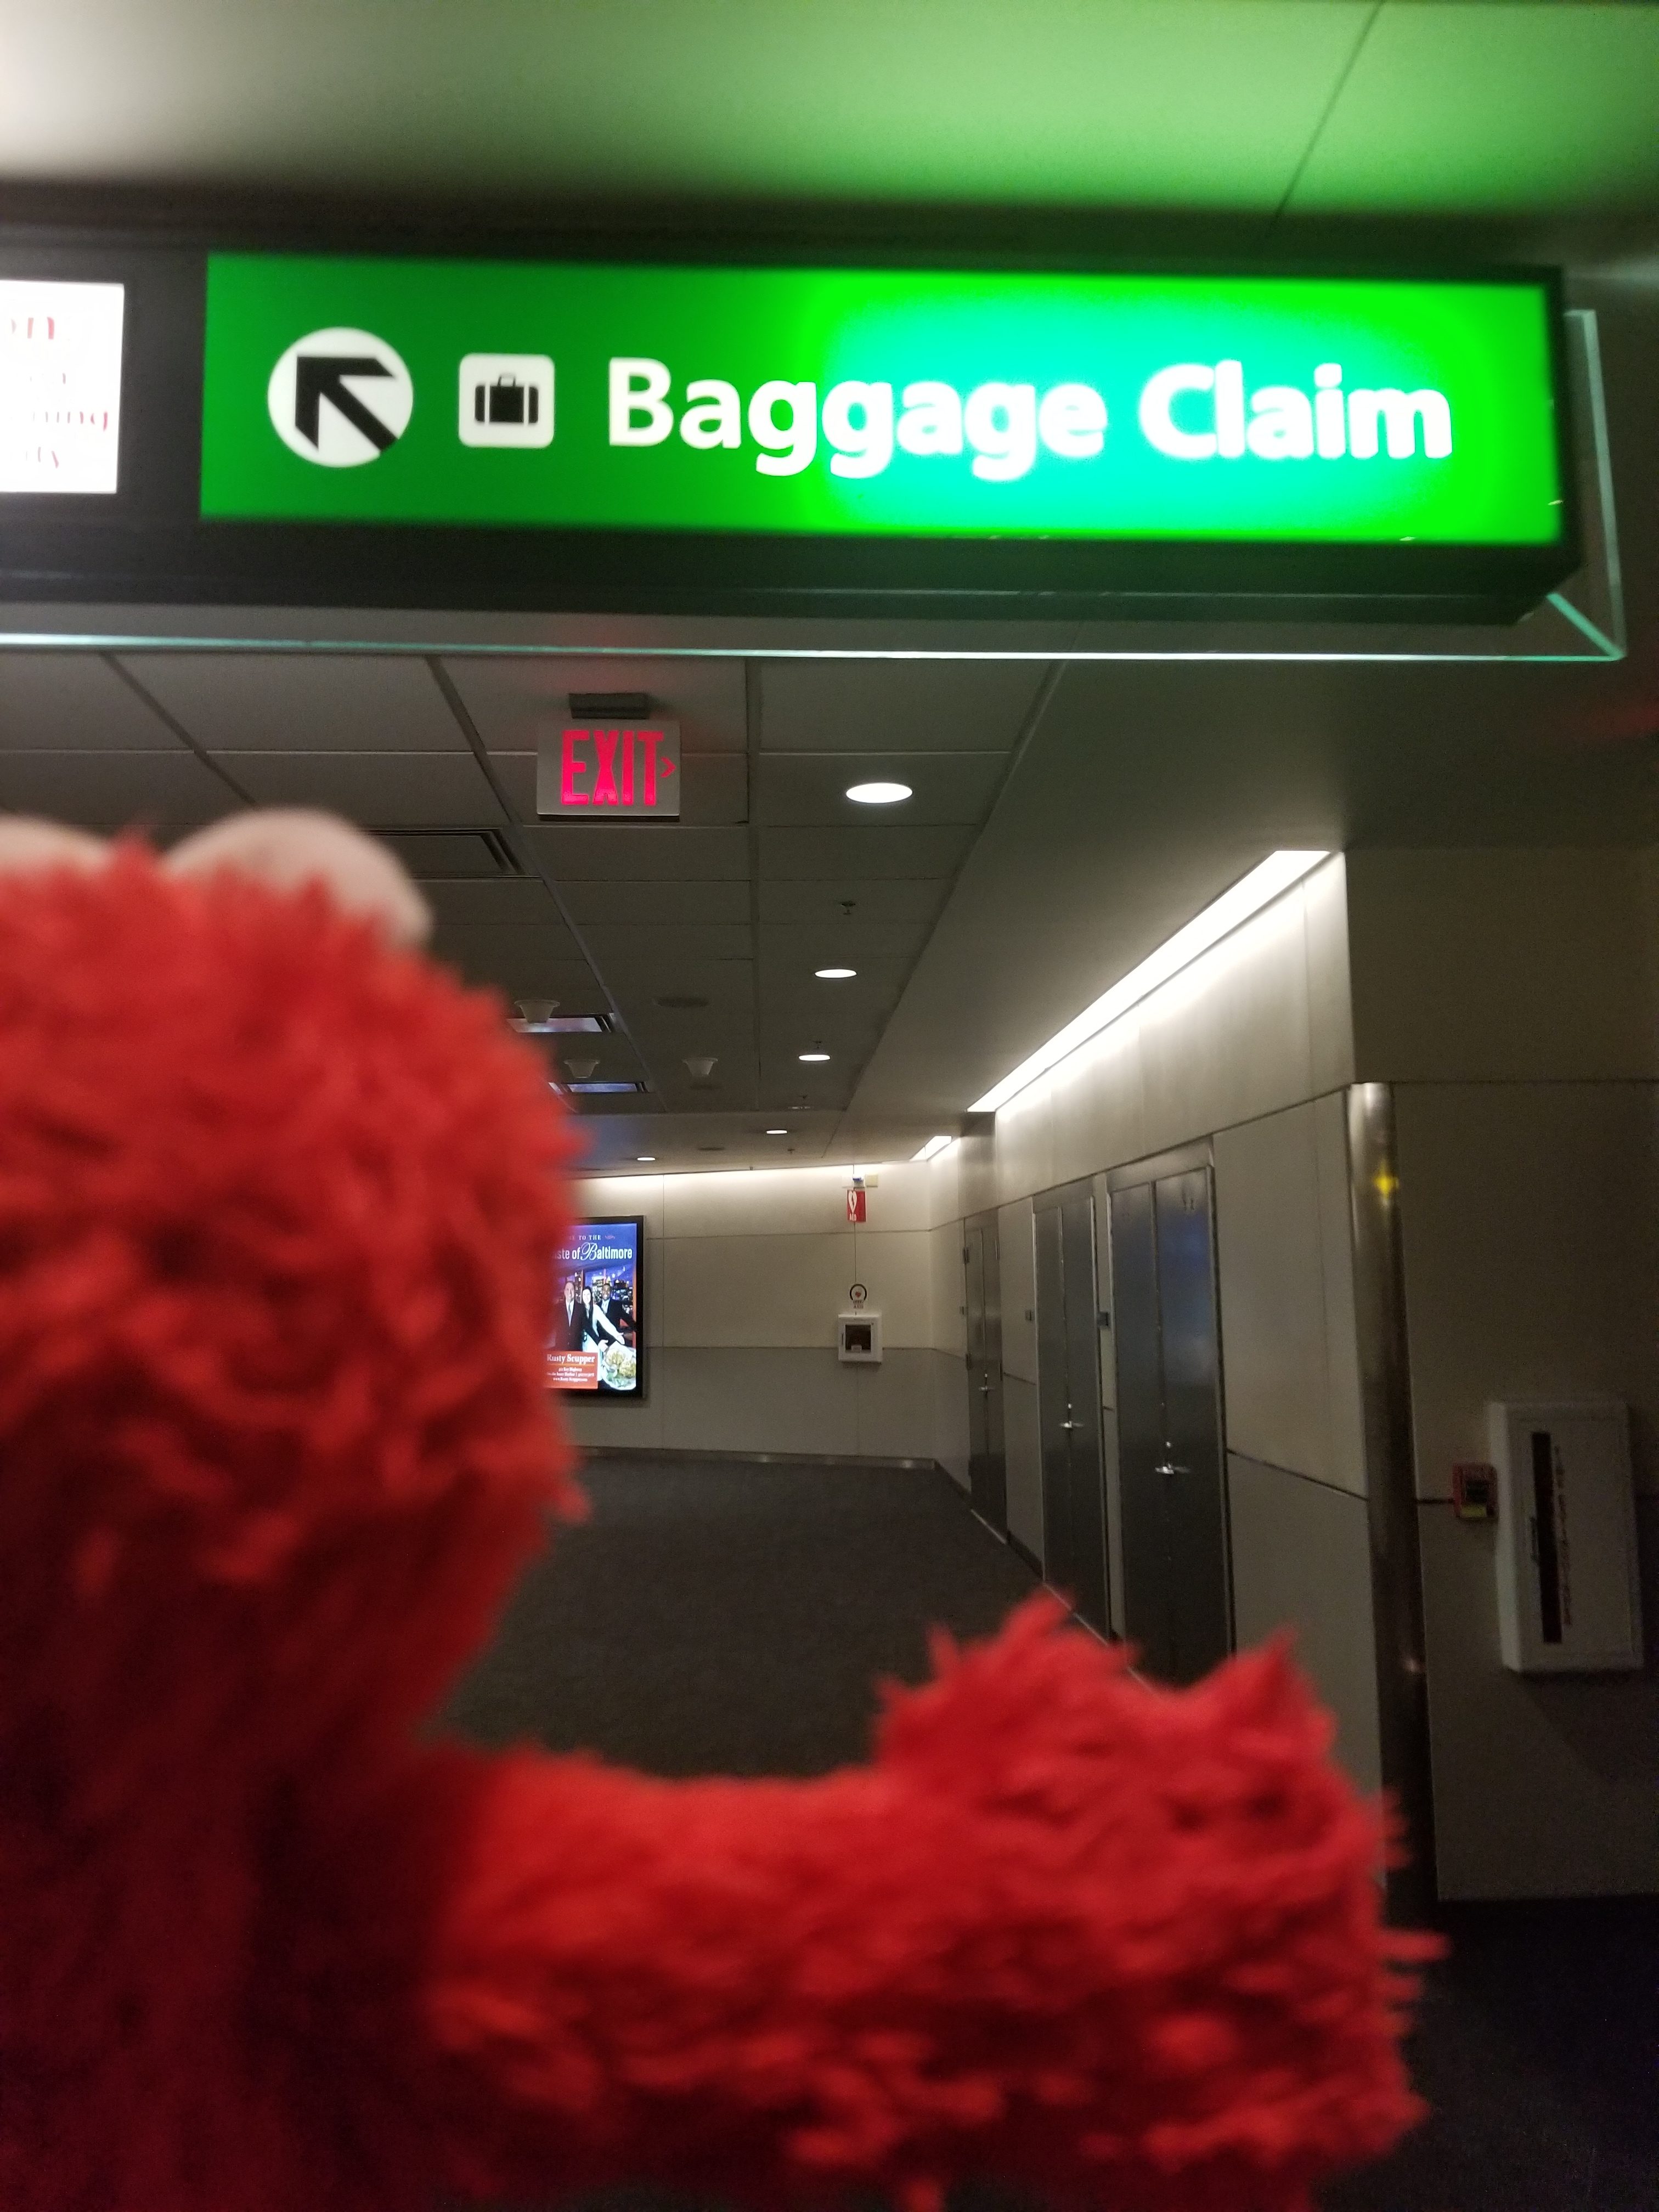 Elmo needs to follow the signs to Baggage Claim!